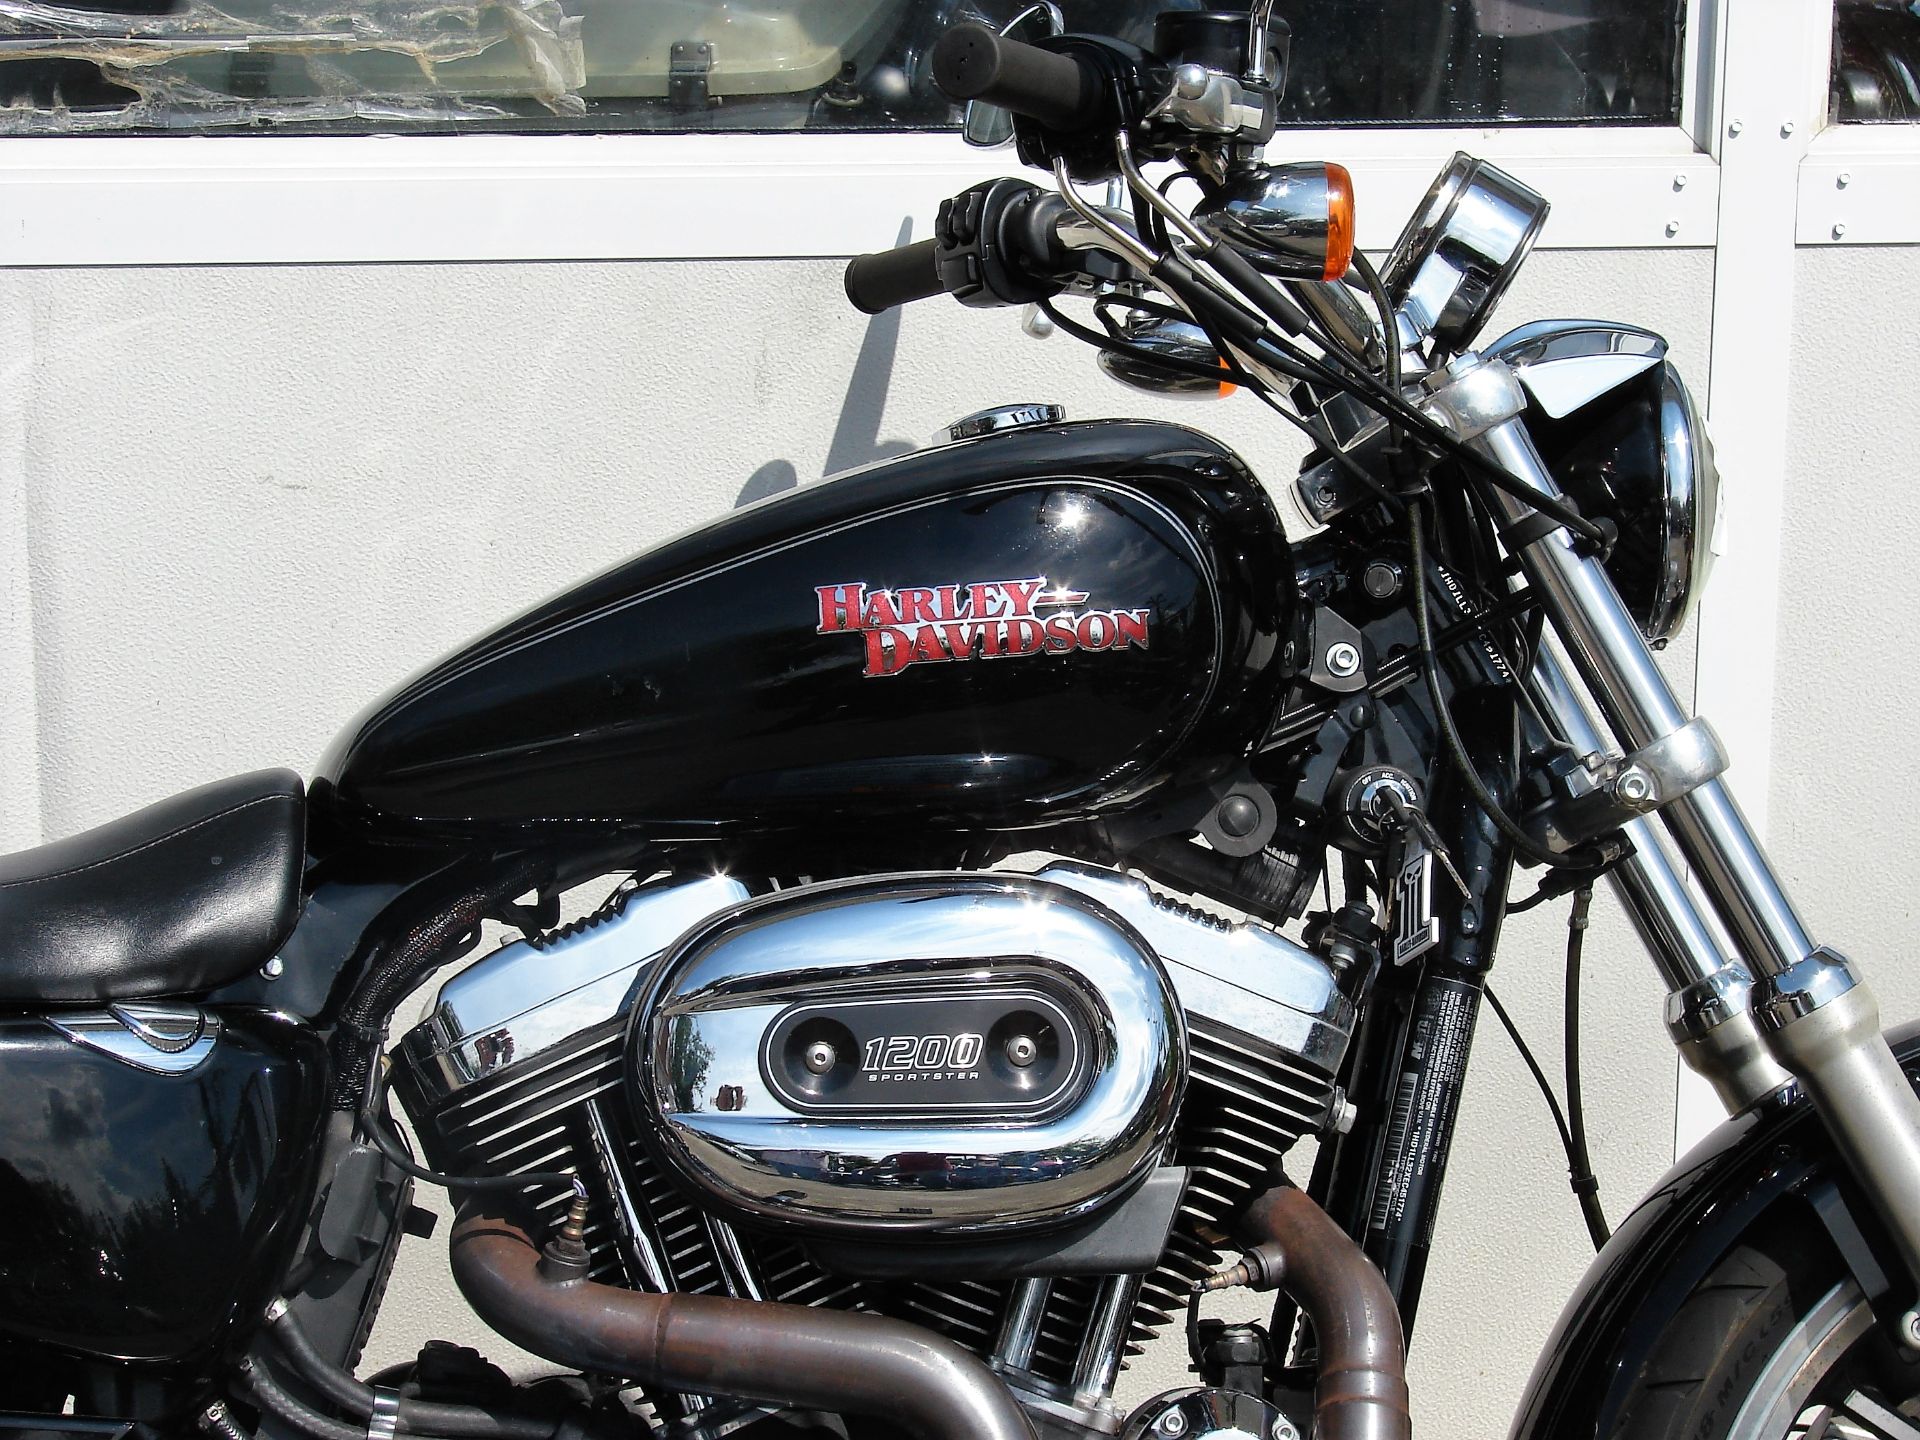 2014 Harley-Davidson XL 1200 T Super Low Sportster in Williamstown, New Jersey - Photo 3